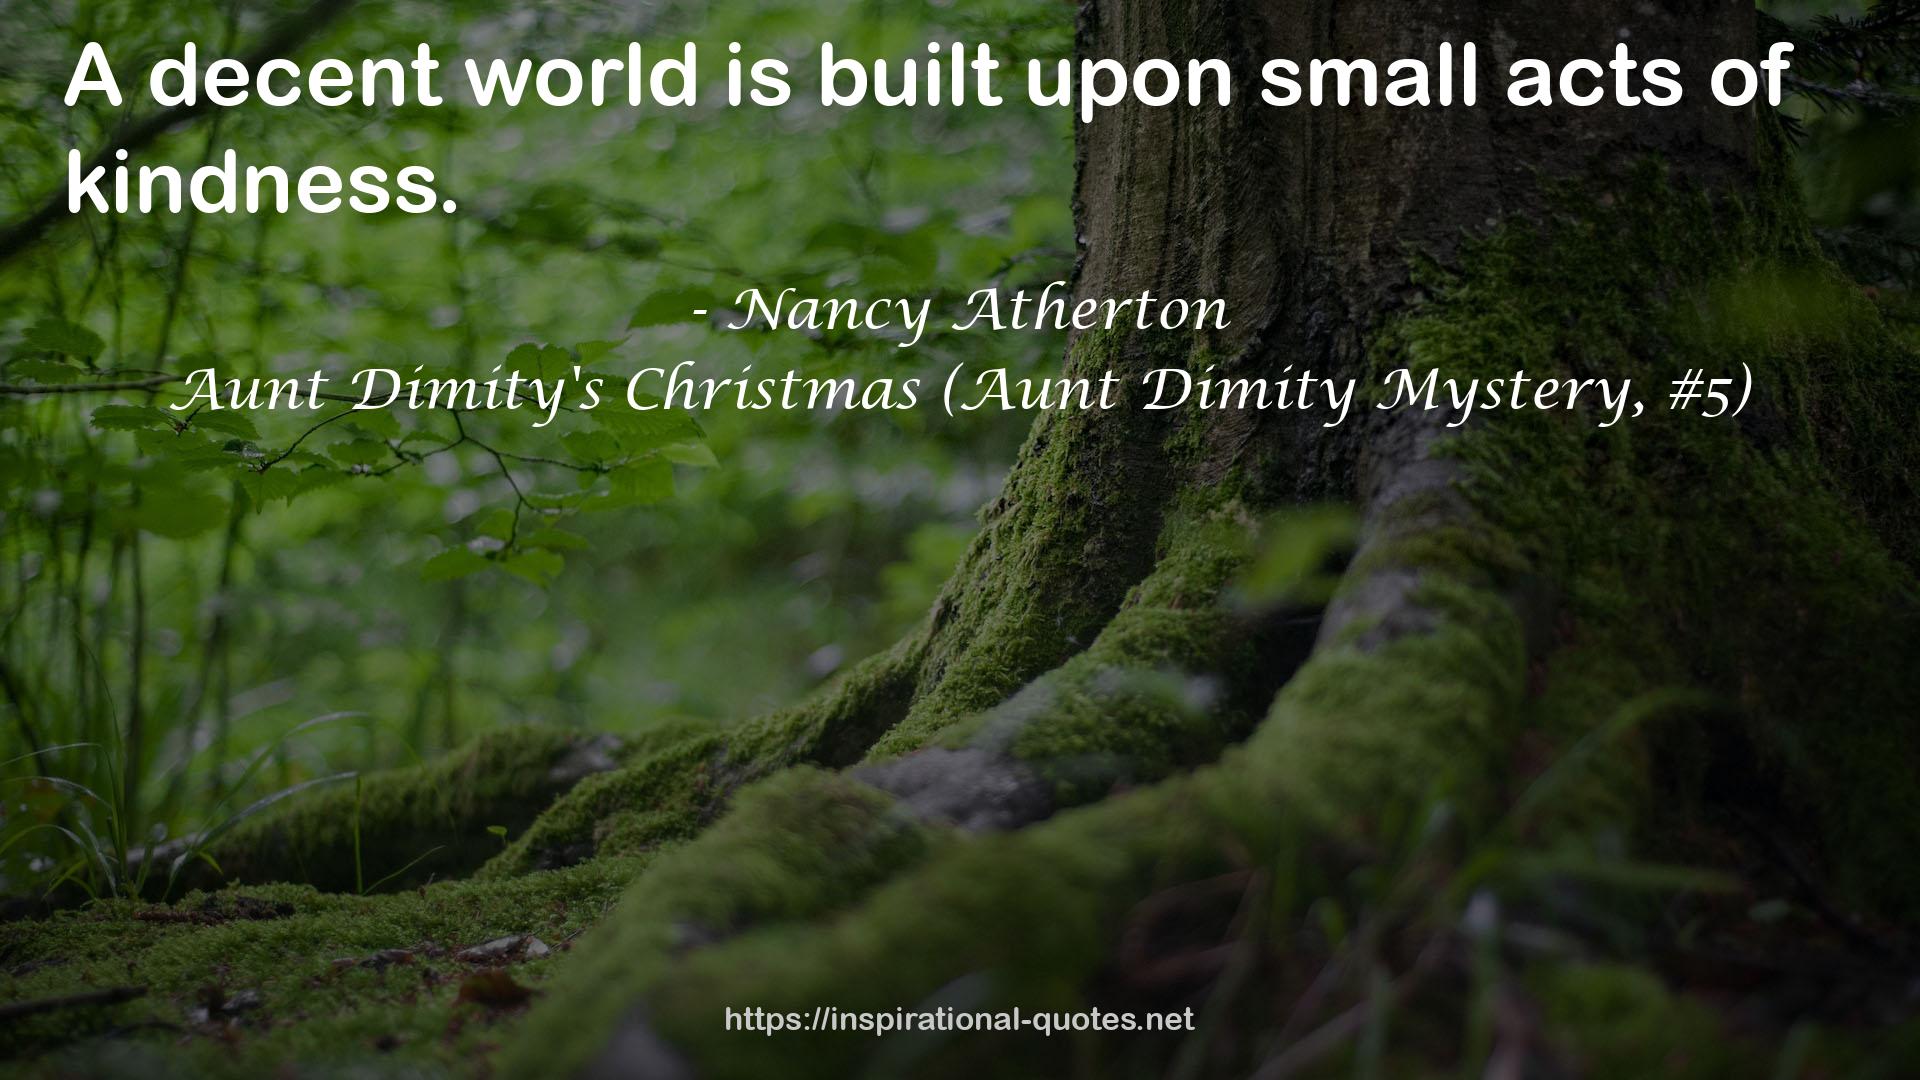 Aunt Dimity's Christmas (Aunt Dimity Mystery, #5) QUOTES